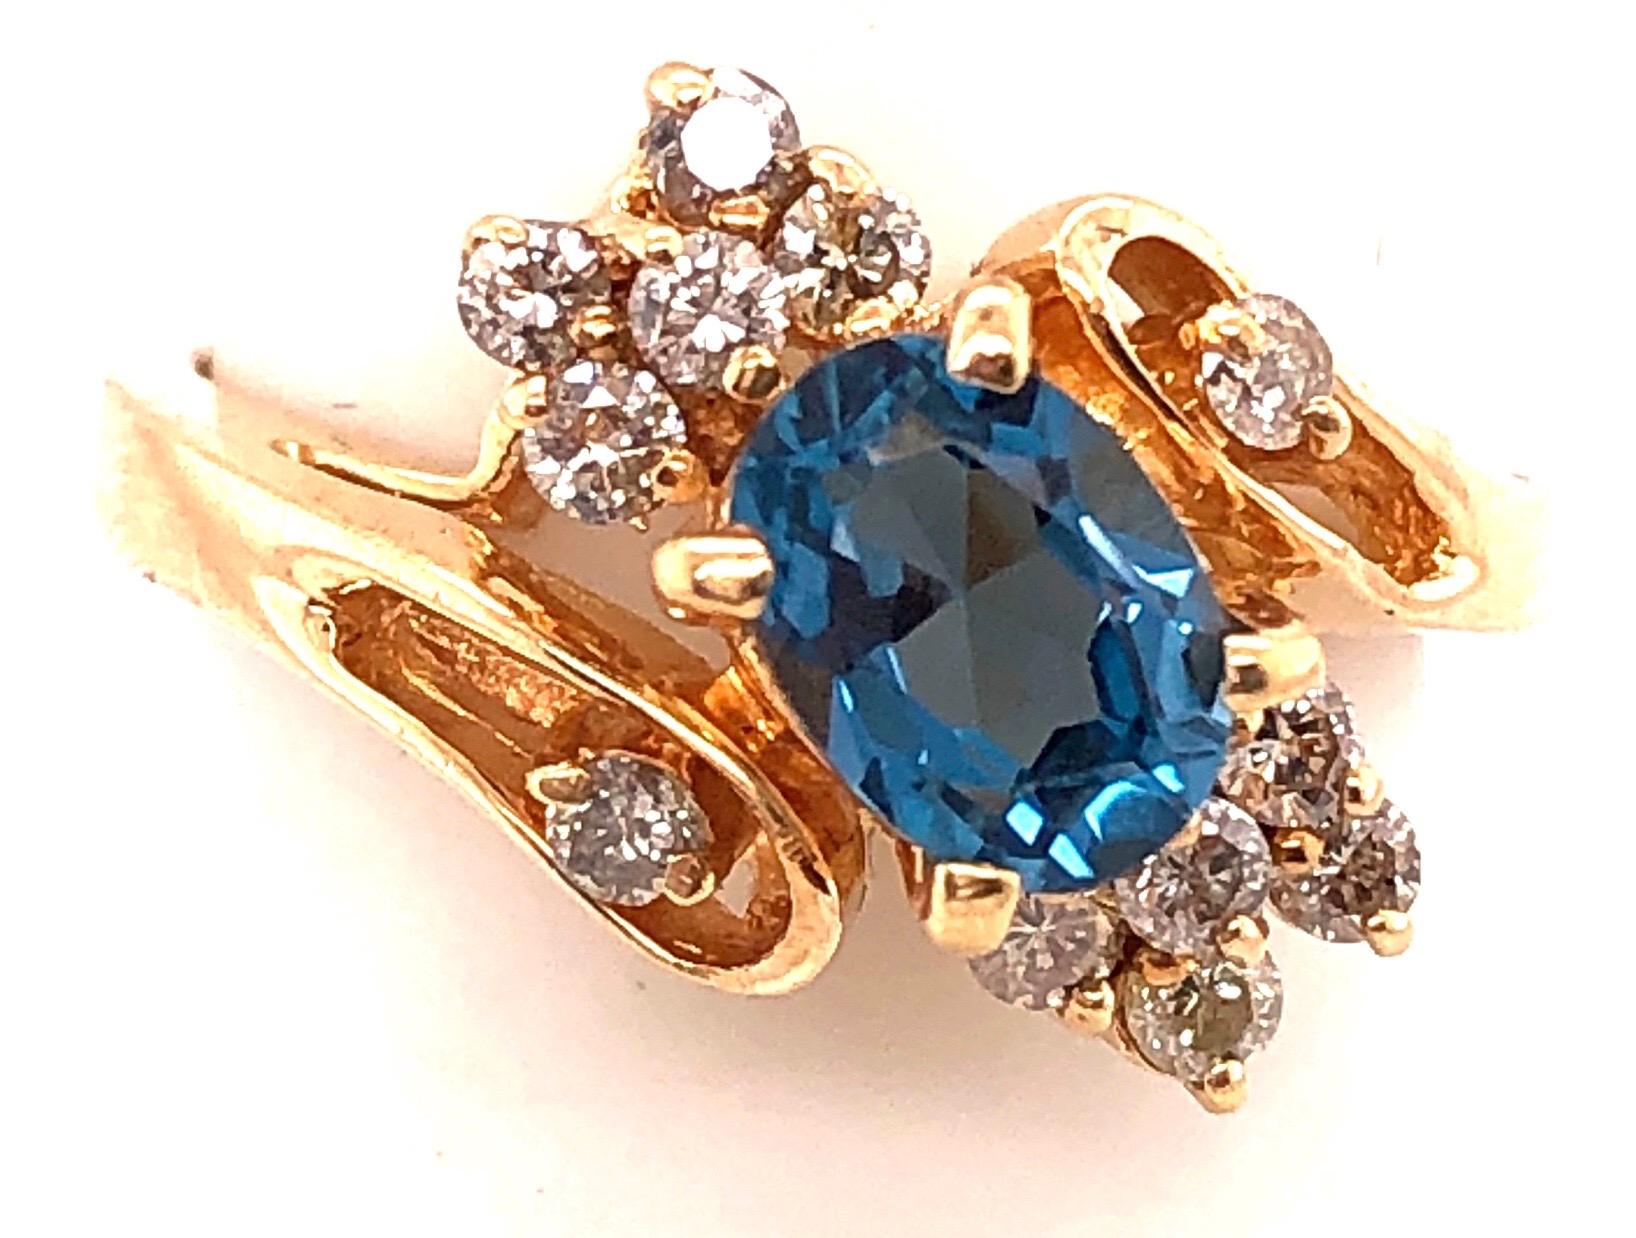 14 Karat Yellow Gold Blue Emerald Ring with Diamond Accents 50.00 TDW In Good Condition For Sale In Stamford, CT